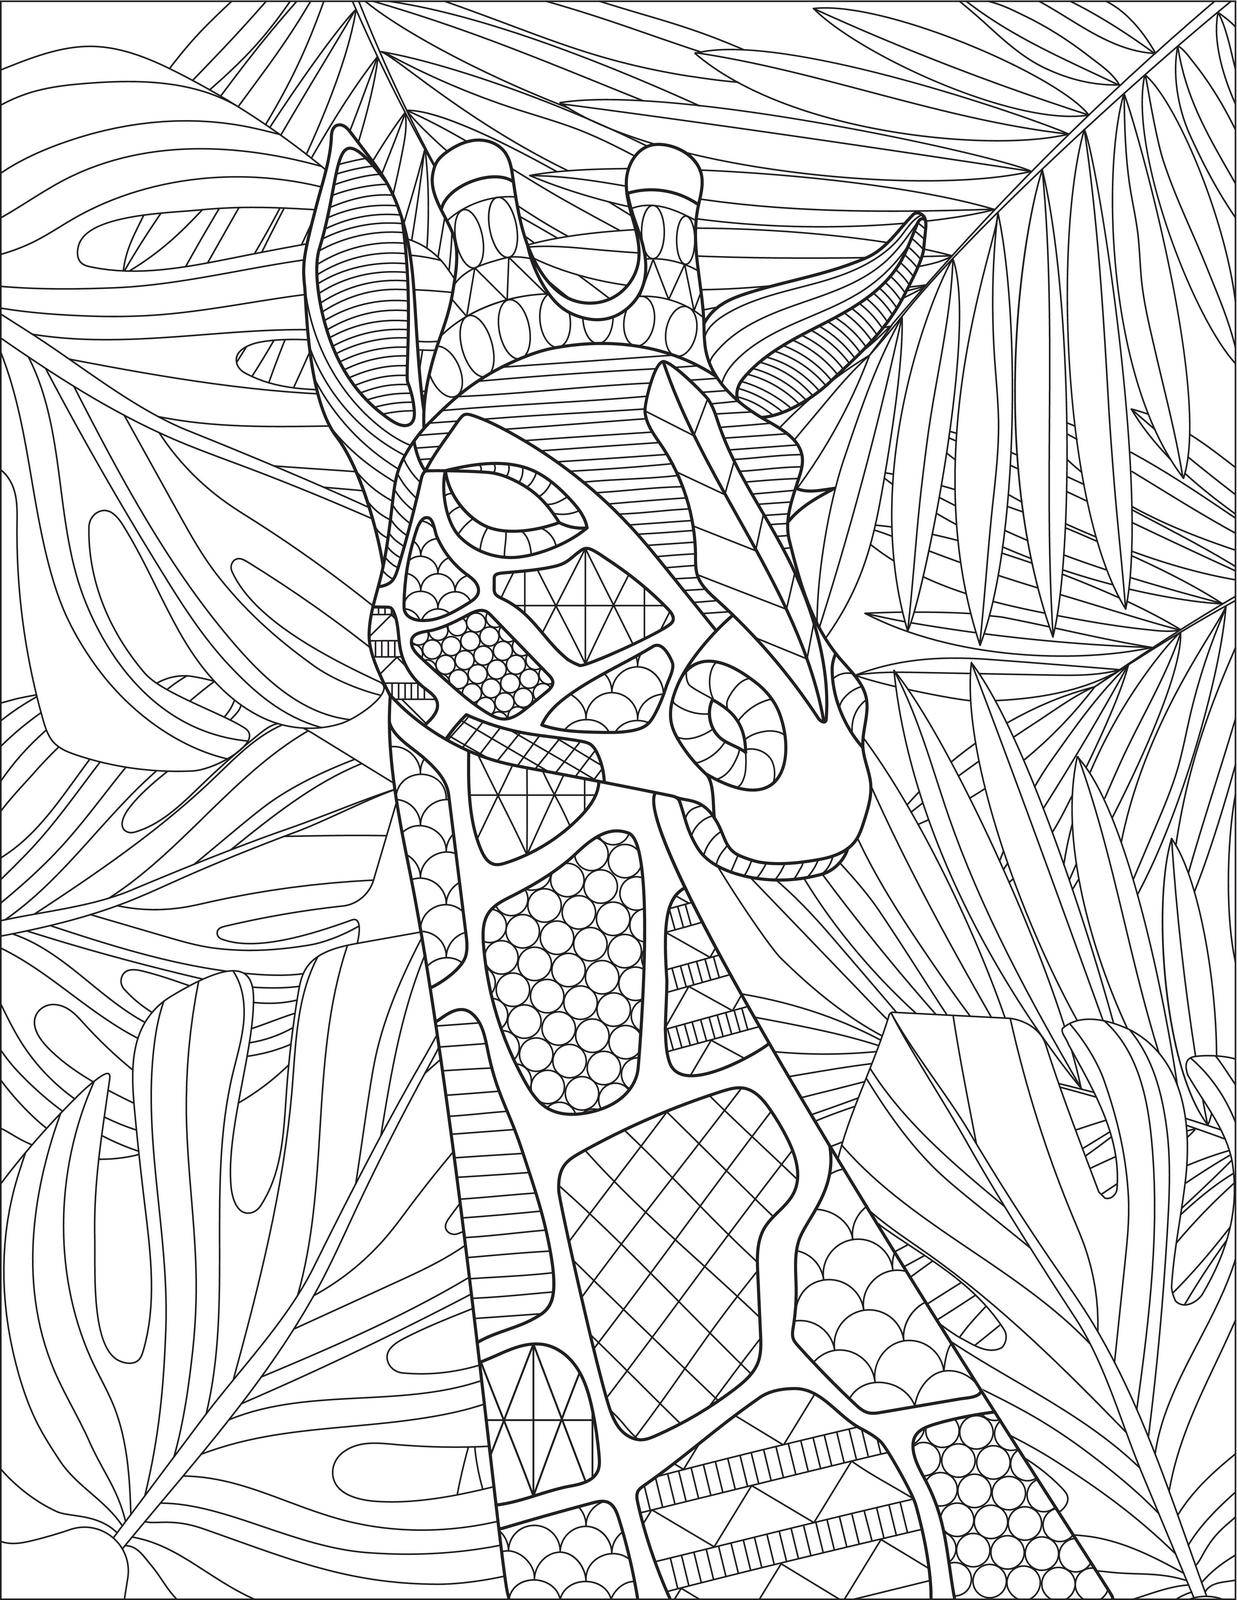 Girrafe Line Drawing With Geometric Details And Detailed Pattern Background